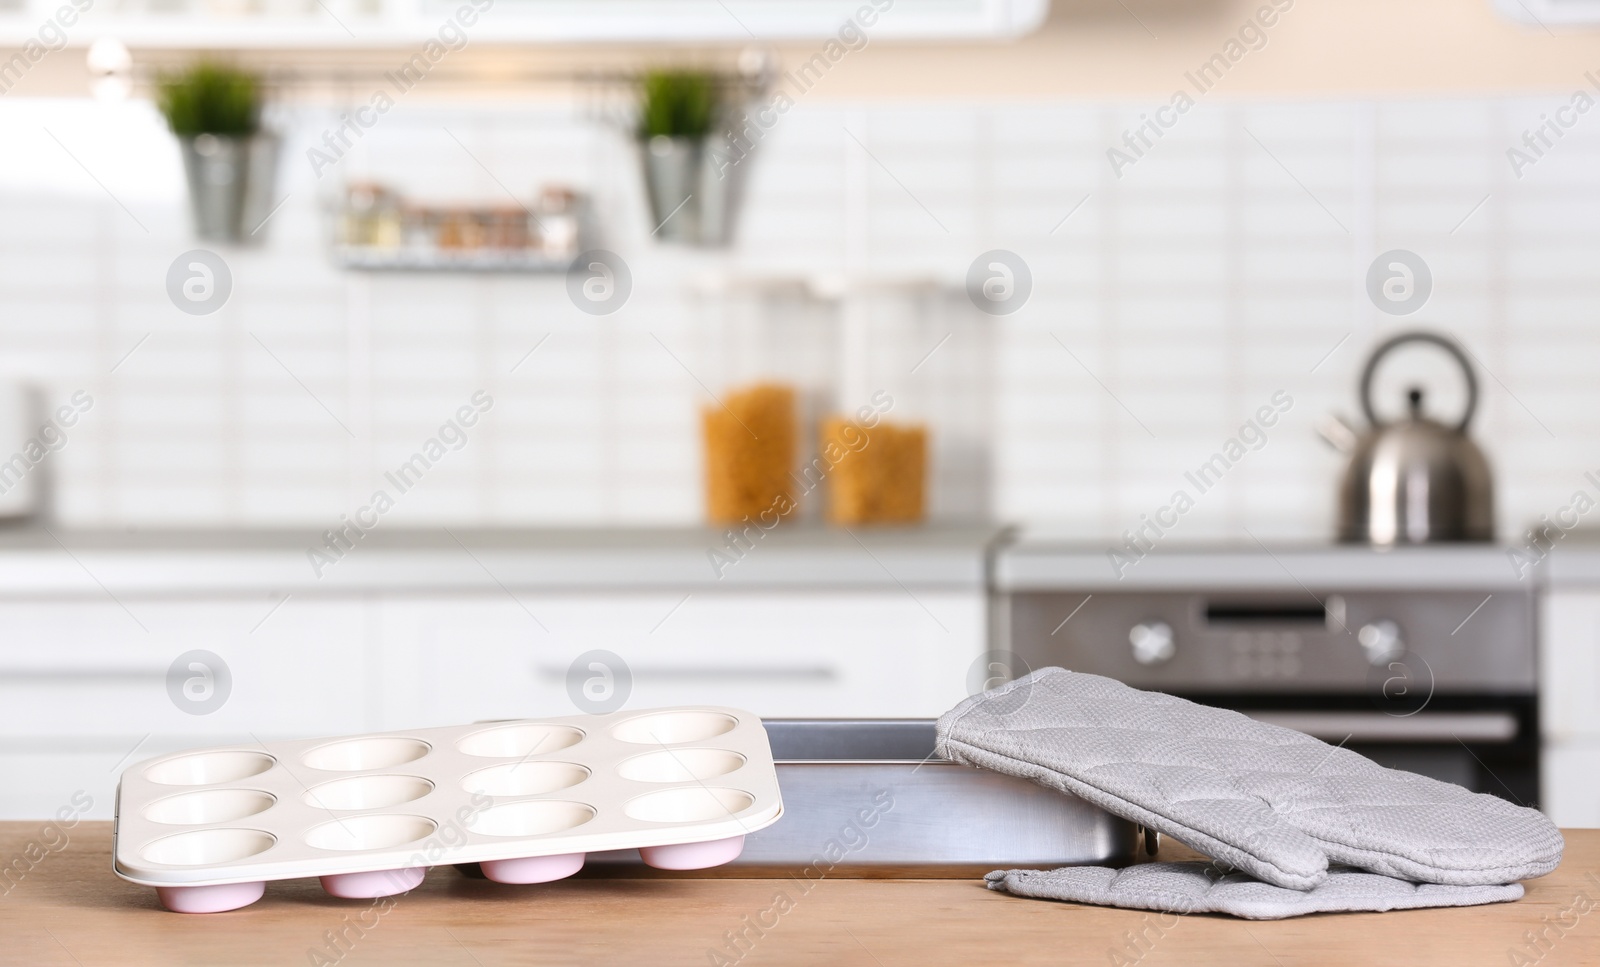 Photo of Clean baking dish, muffin pan and oven glove on table in kitchen. Space for text